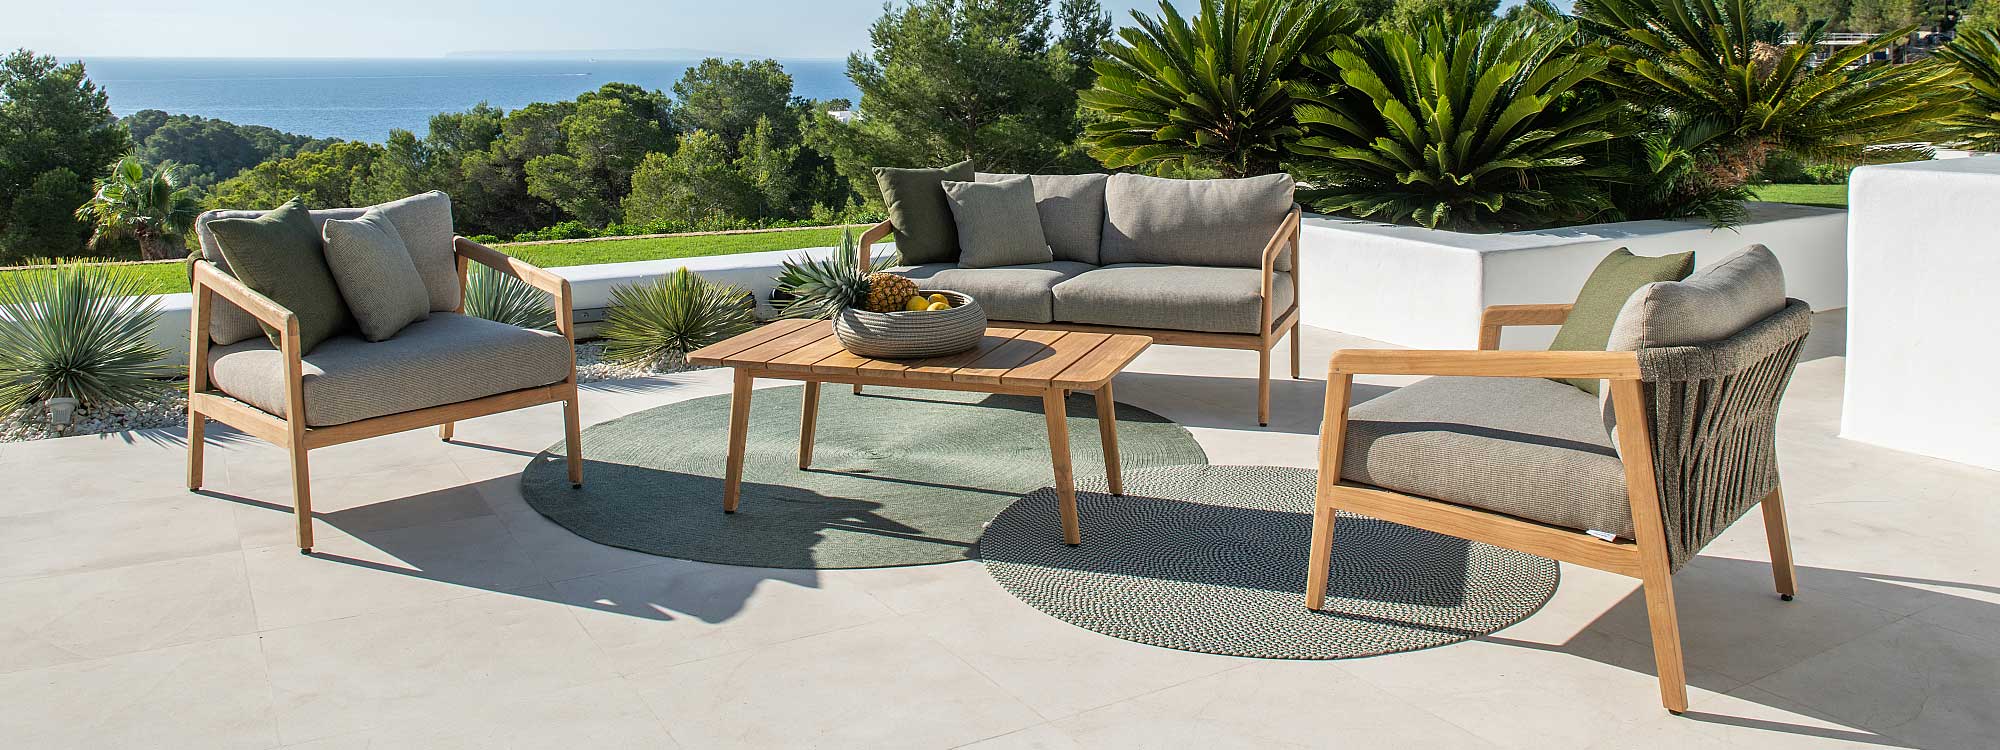 Image of Ritz teak garden sofa and lounge chairs in FSC teak by Jati & Kebon, shown on sunny whitewashed terrace, with lawn, palms, trees and sea in the background